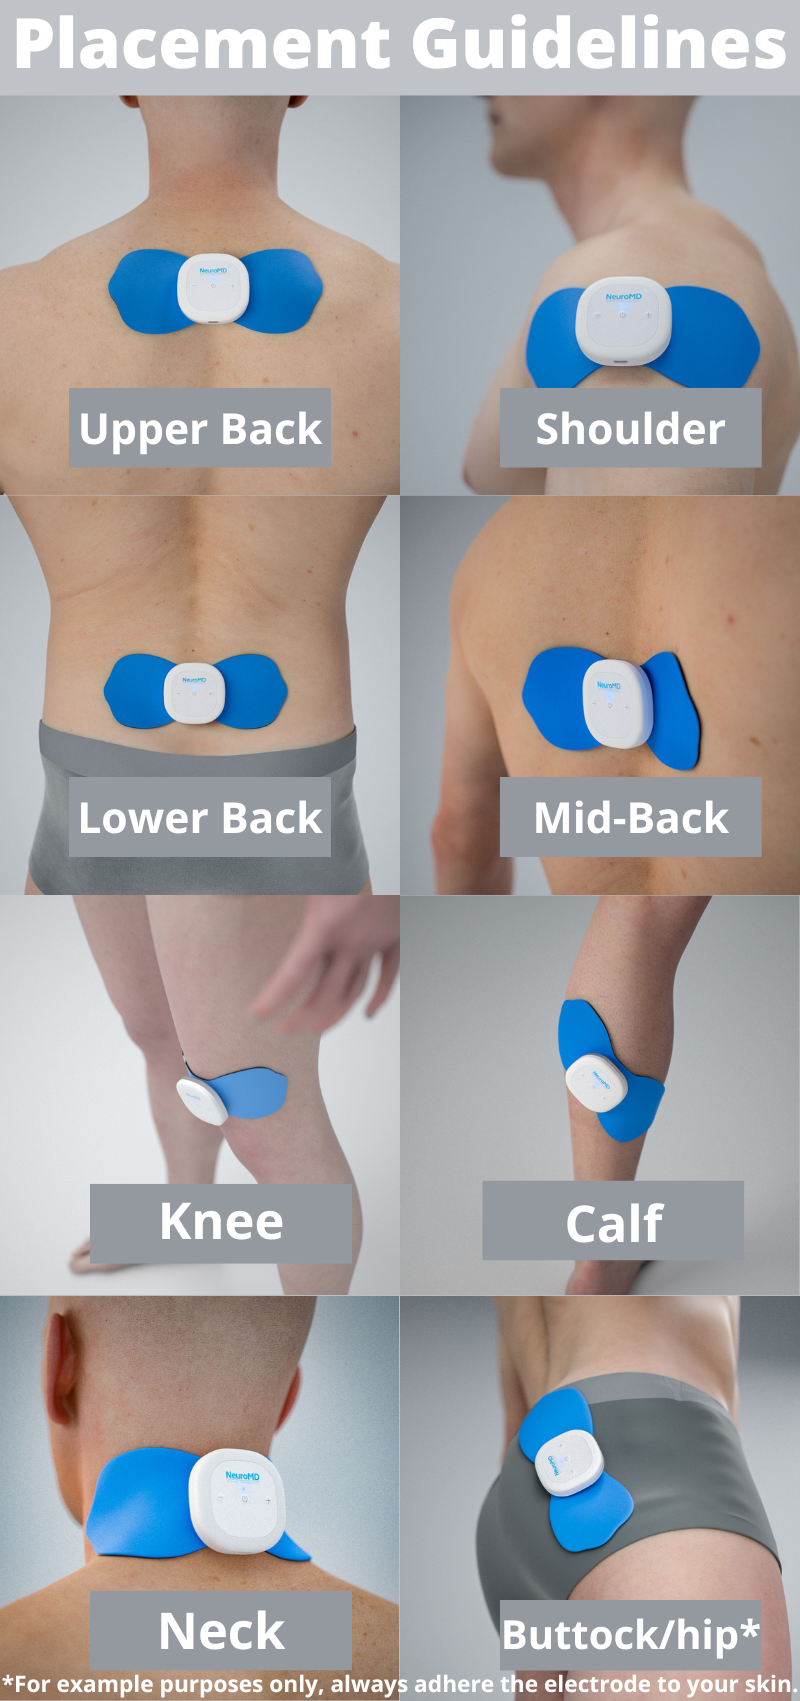 TENS Machine for Sciatica & Back Pain: Best Guide for Placement & Quic –  Easy Posture Brands